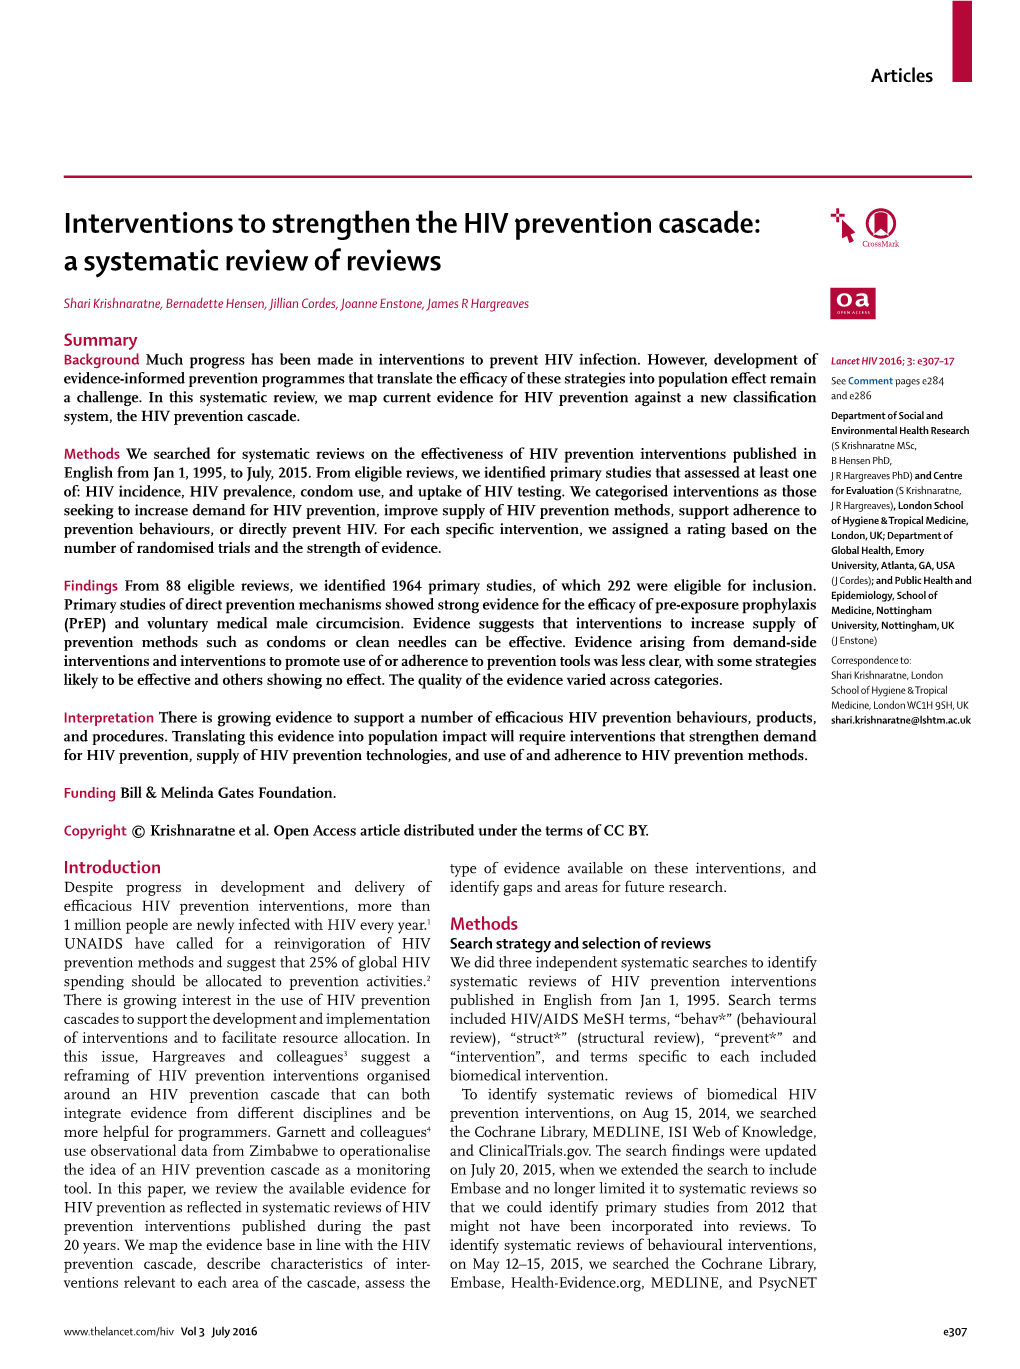 Interventions to Strengthen the HIV Prevention Cascade: a Systematic Review of Reviews